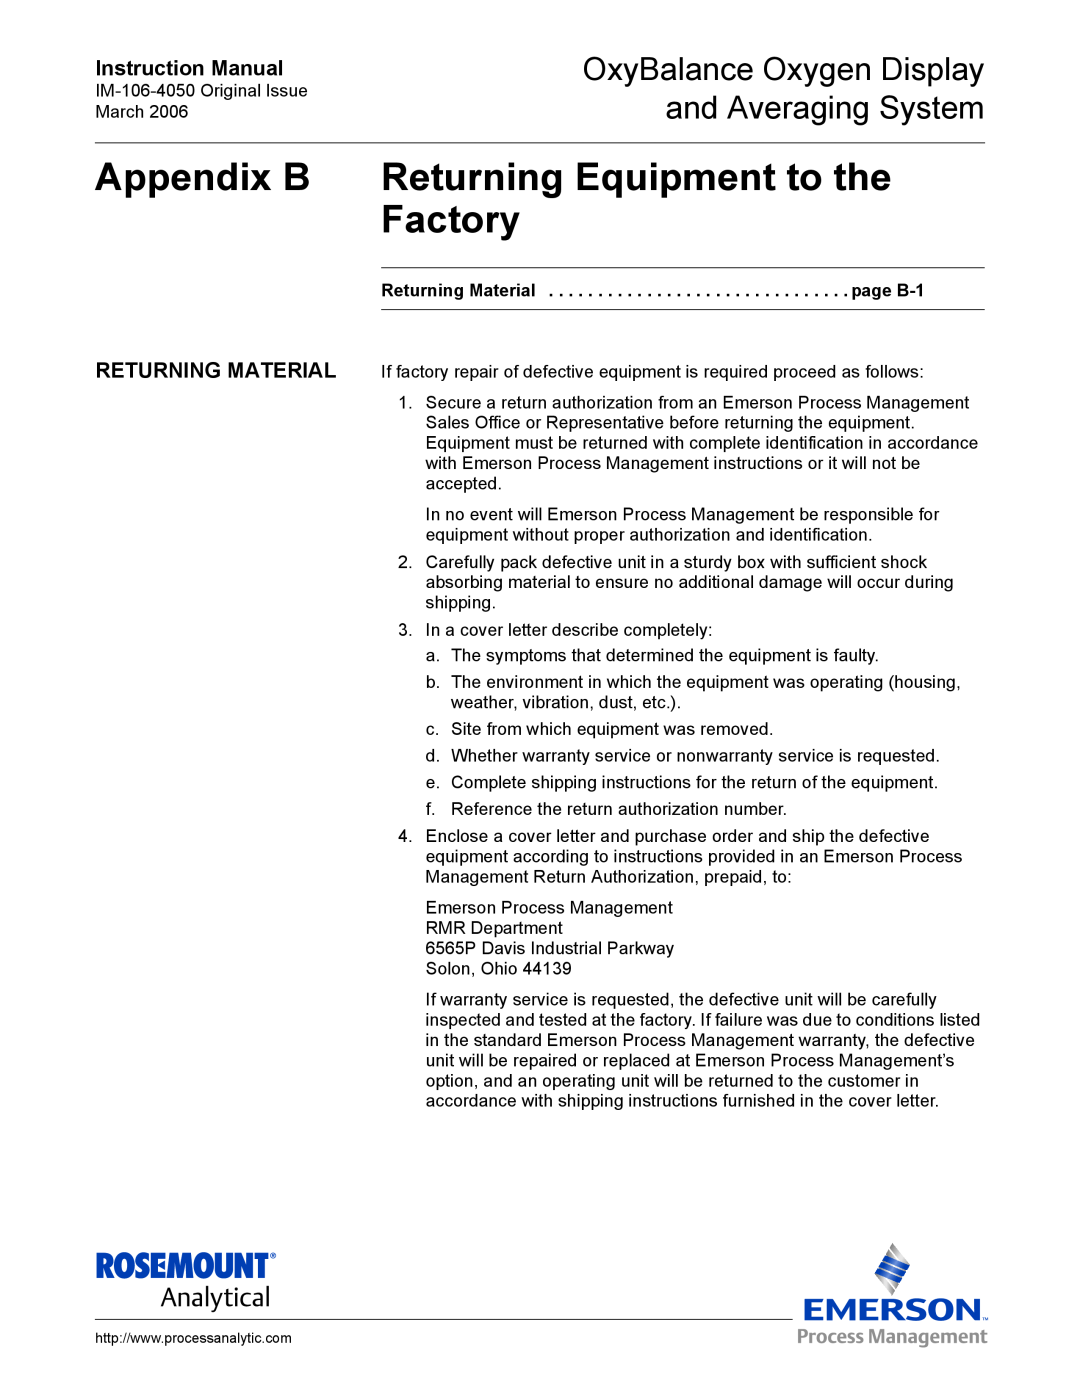 Emerson IM-106-4050 Appendix B Returning Equipment to the Factory, Returning Material, Instruction Manual 